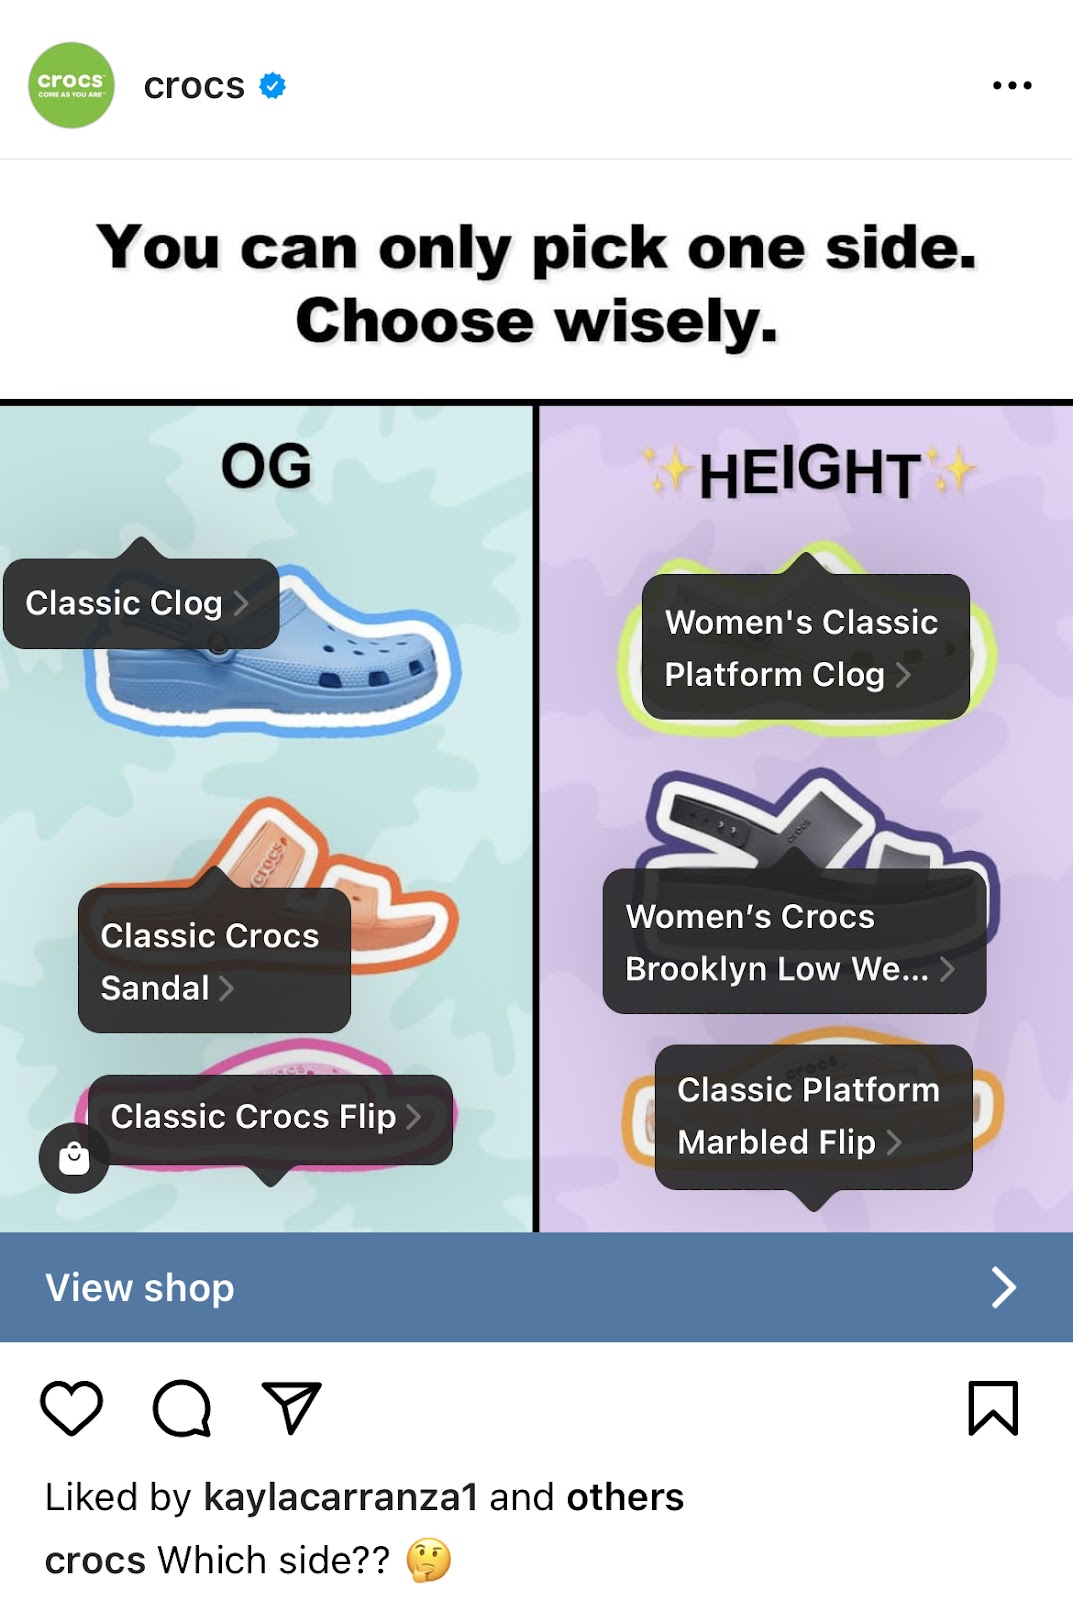 Crocs Instagram product tags